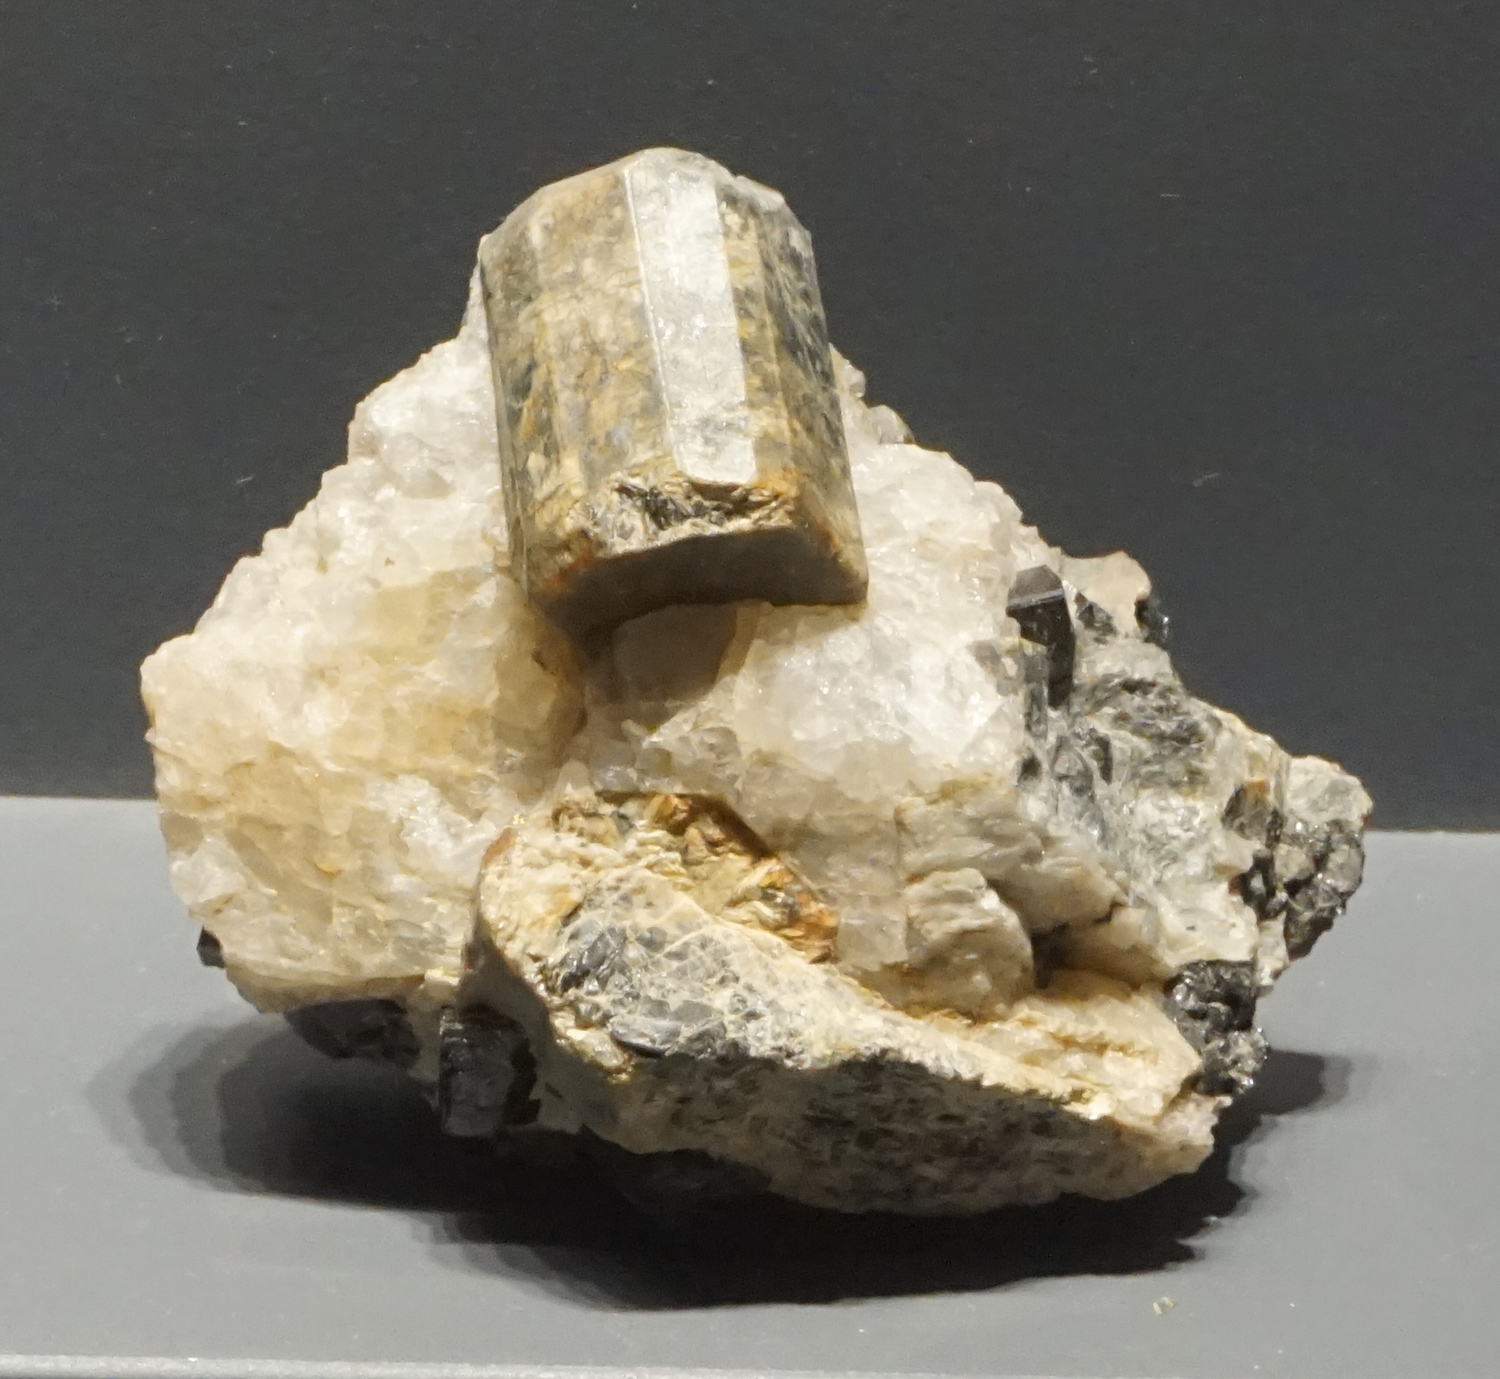 Light-Colored Cordierite on Matrix from Kragero, Telemark, Norway